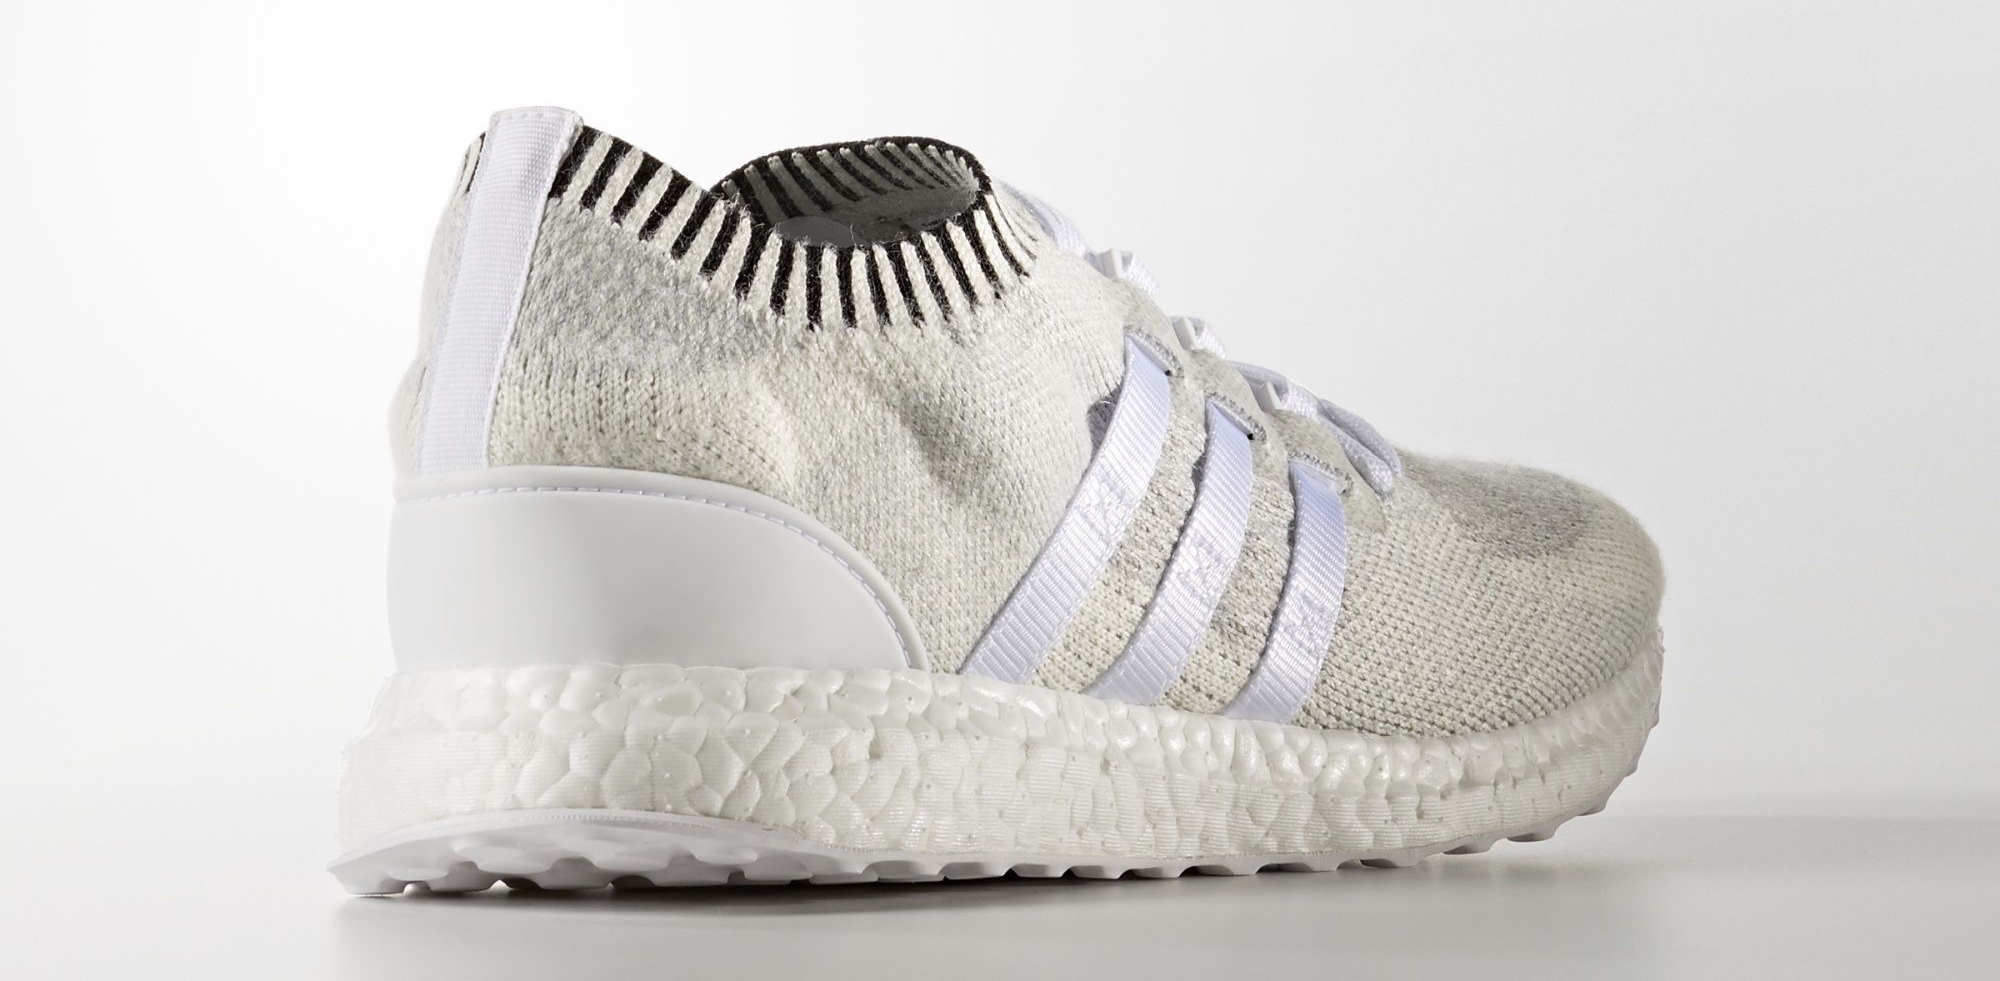 adidas-eqt-support-ultra-pk-vintage-white-2